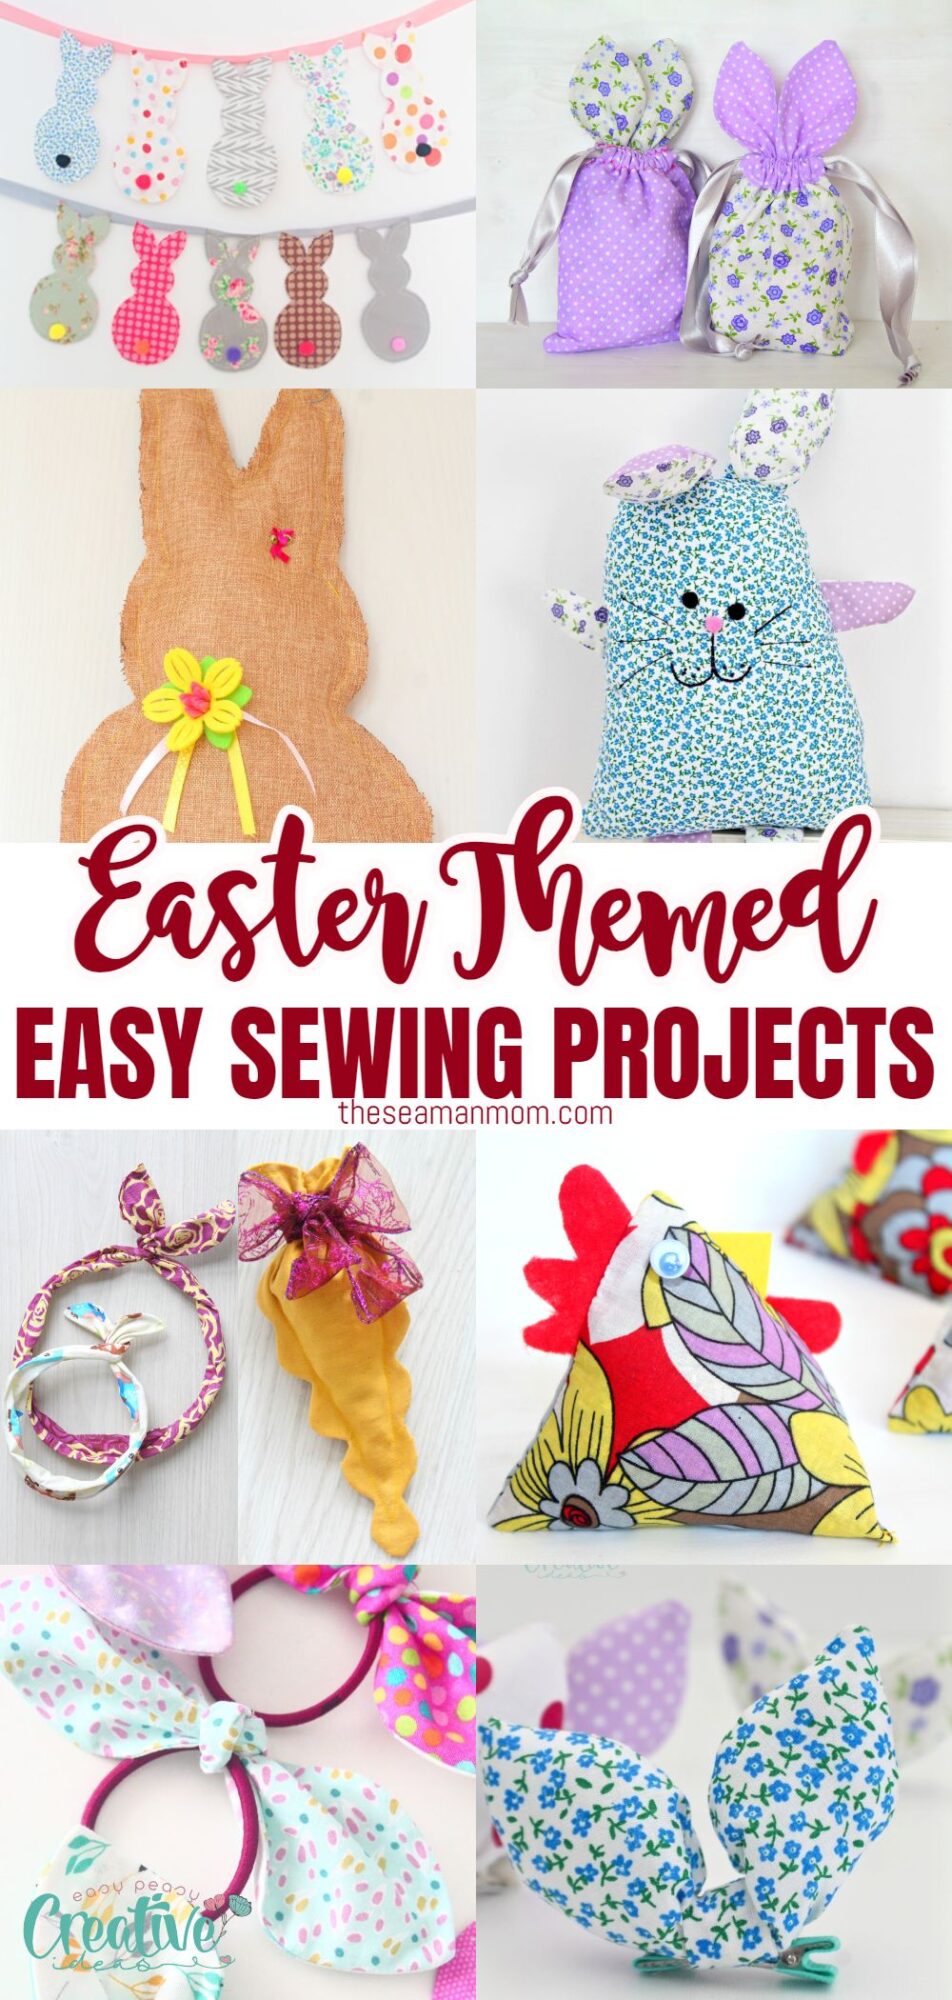 9 Easy Easter sewing projects to make